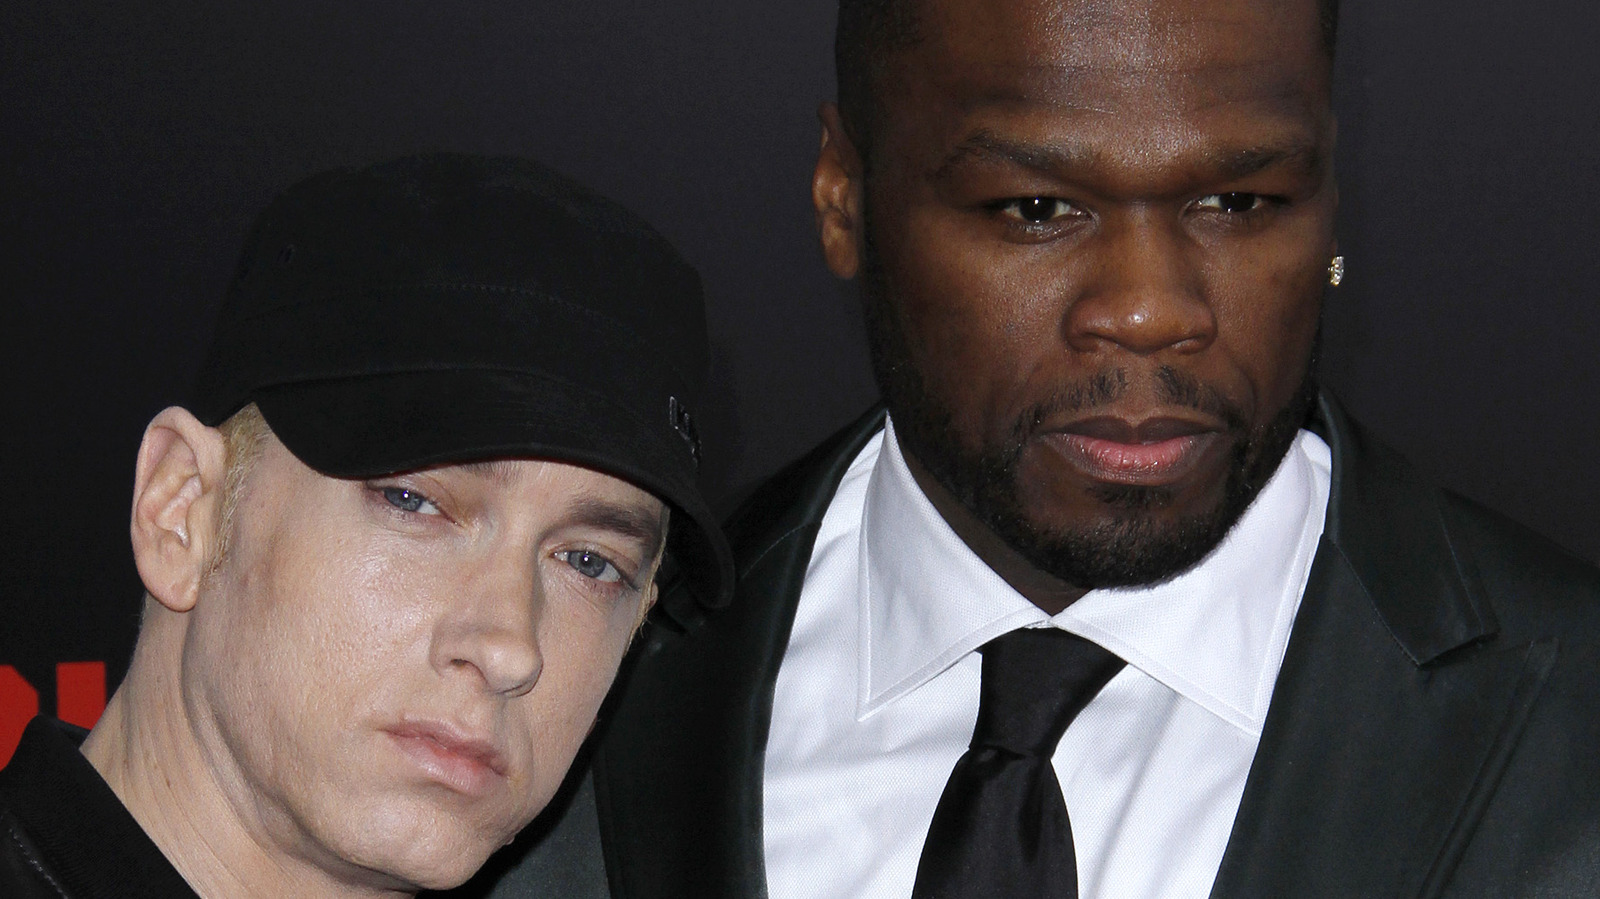 A Look Inside Eminem And 50 Cent's Relationship - Internewscast